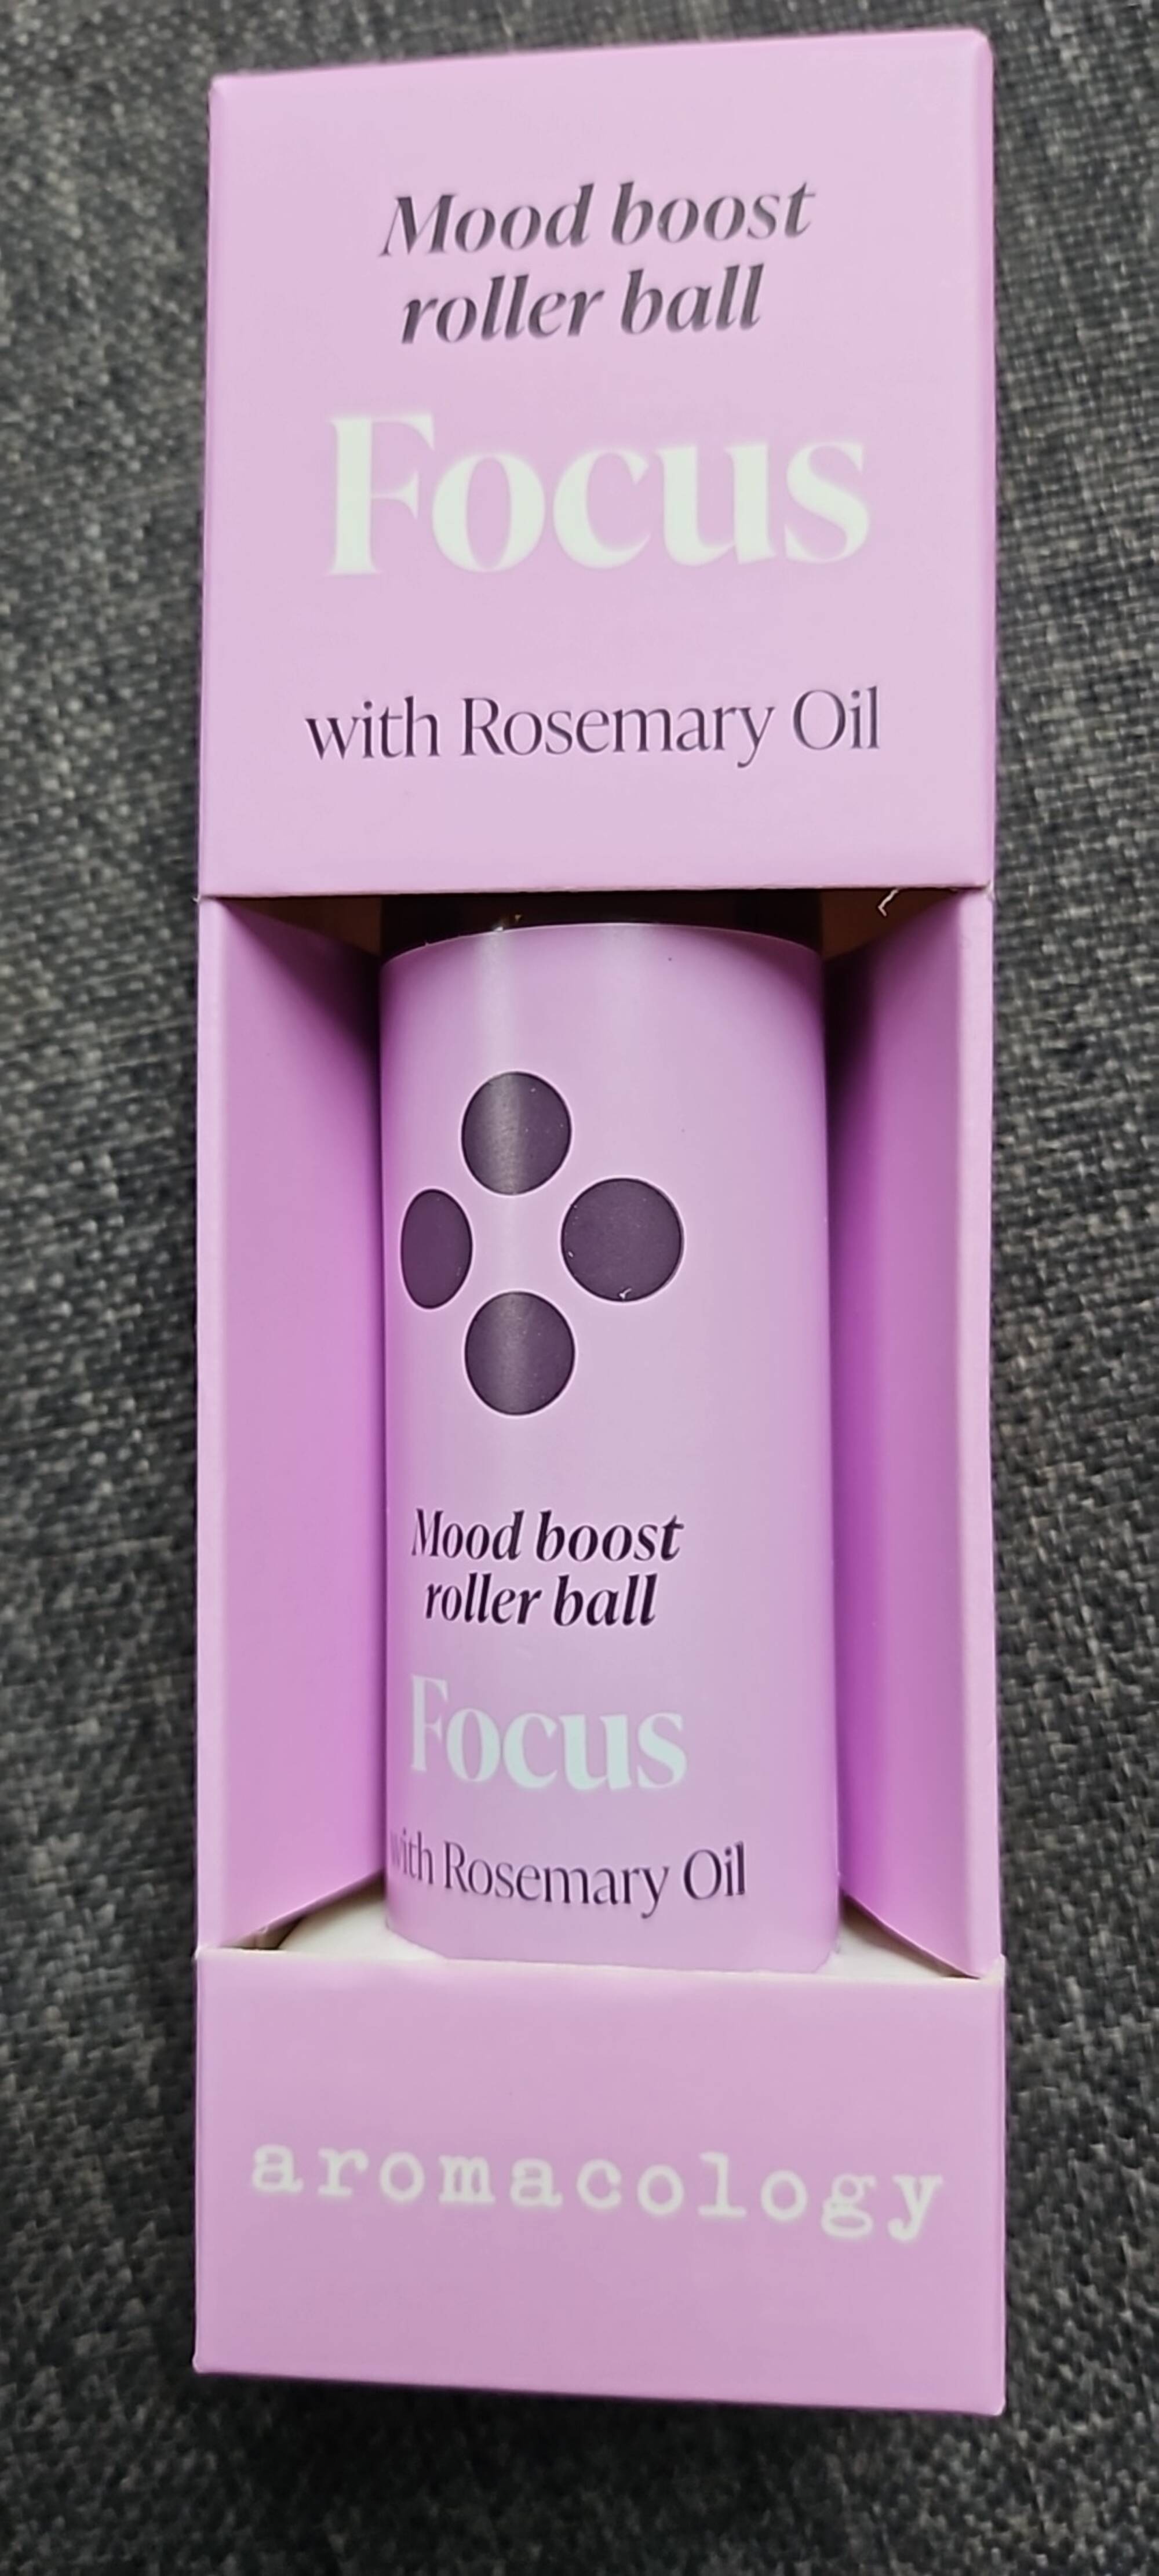 AROMACOLOGY - Focus mood boost roller ball